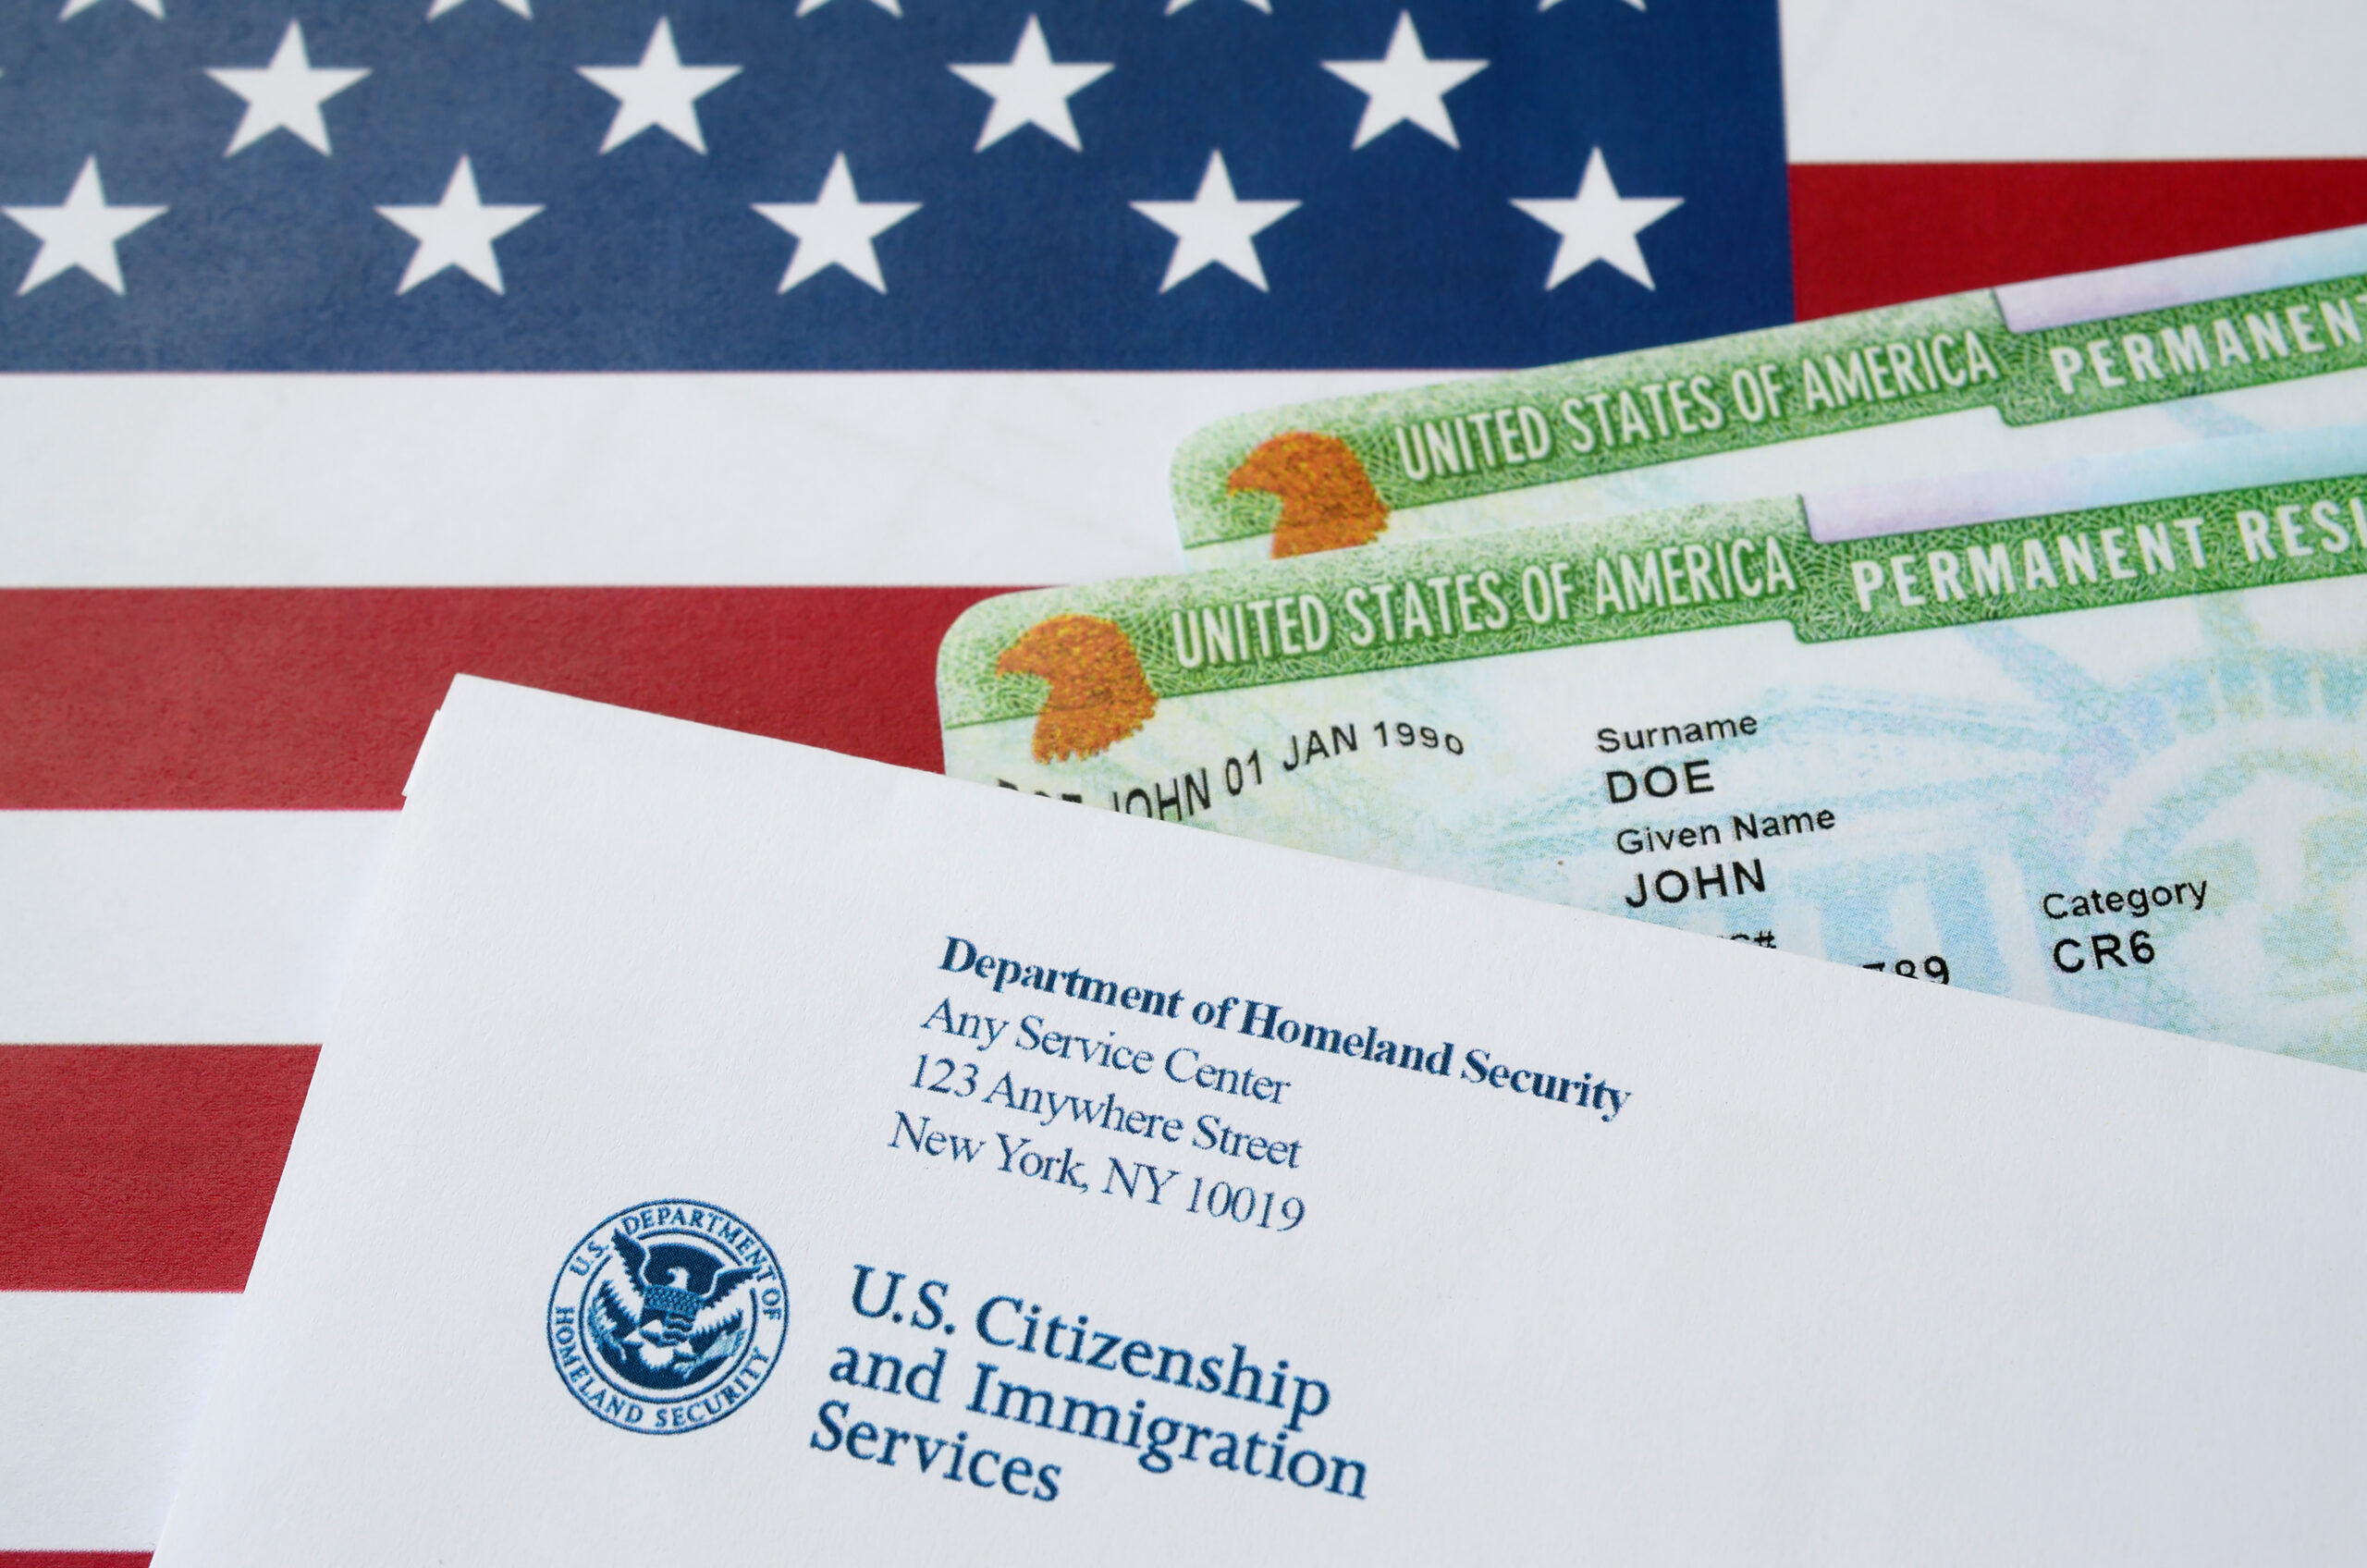 United States Permanent resident green cards from dv-lottery lies on United States flag with envelope from Department of Homeland Security